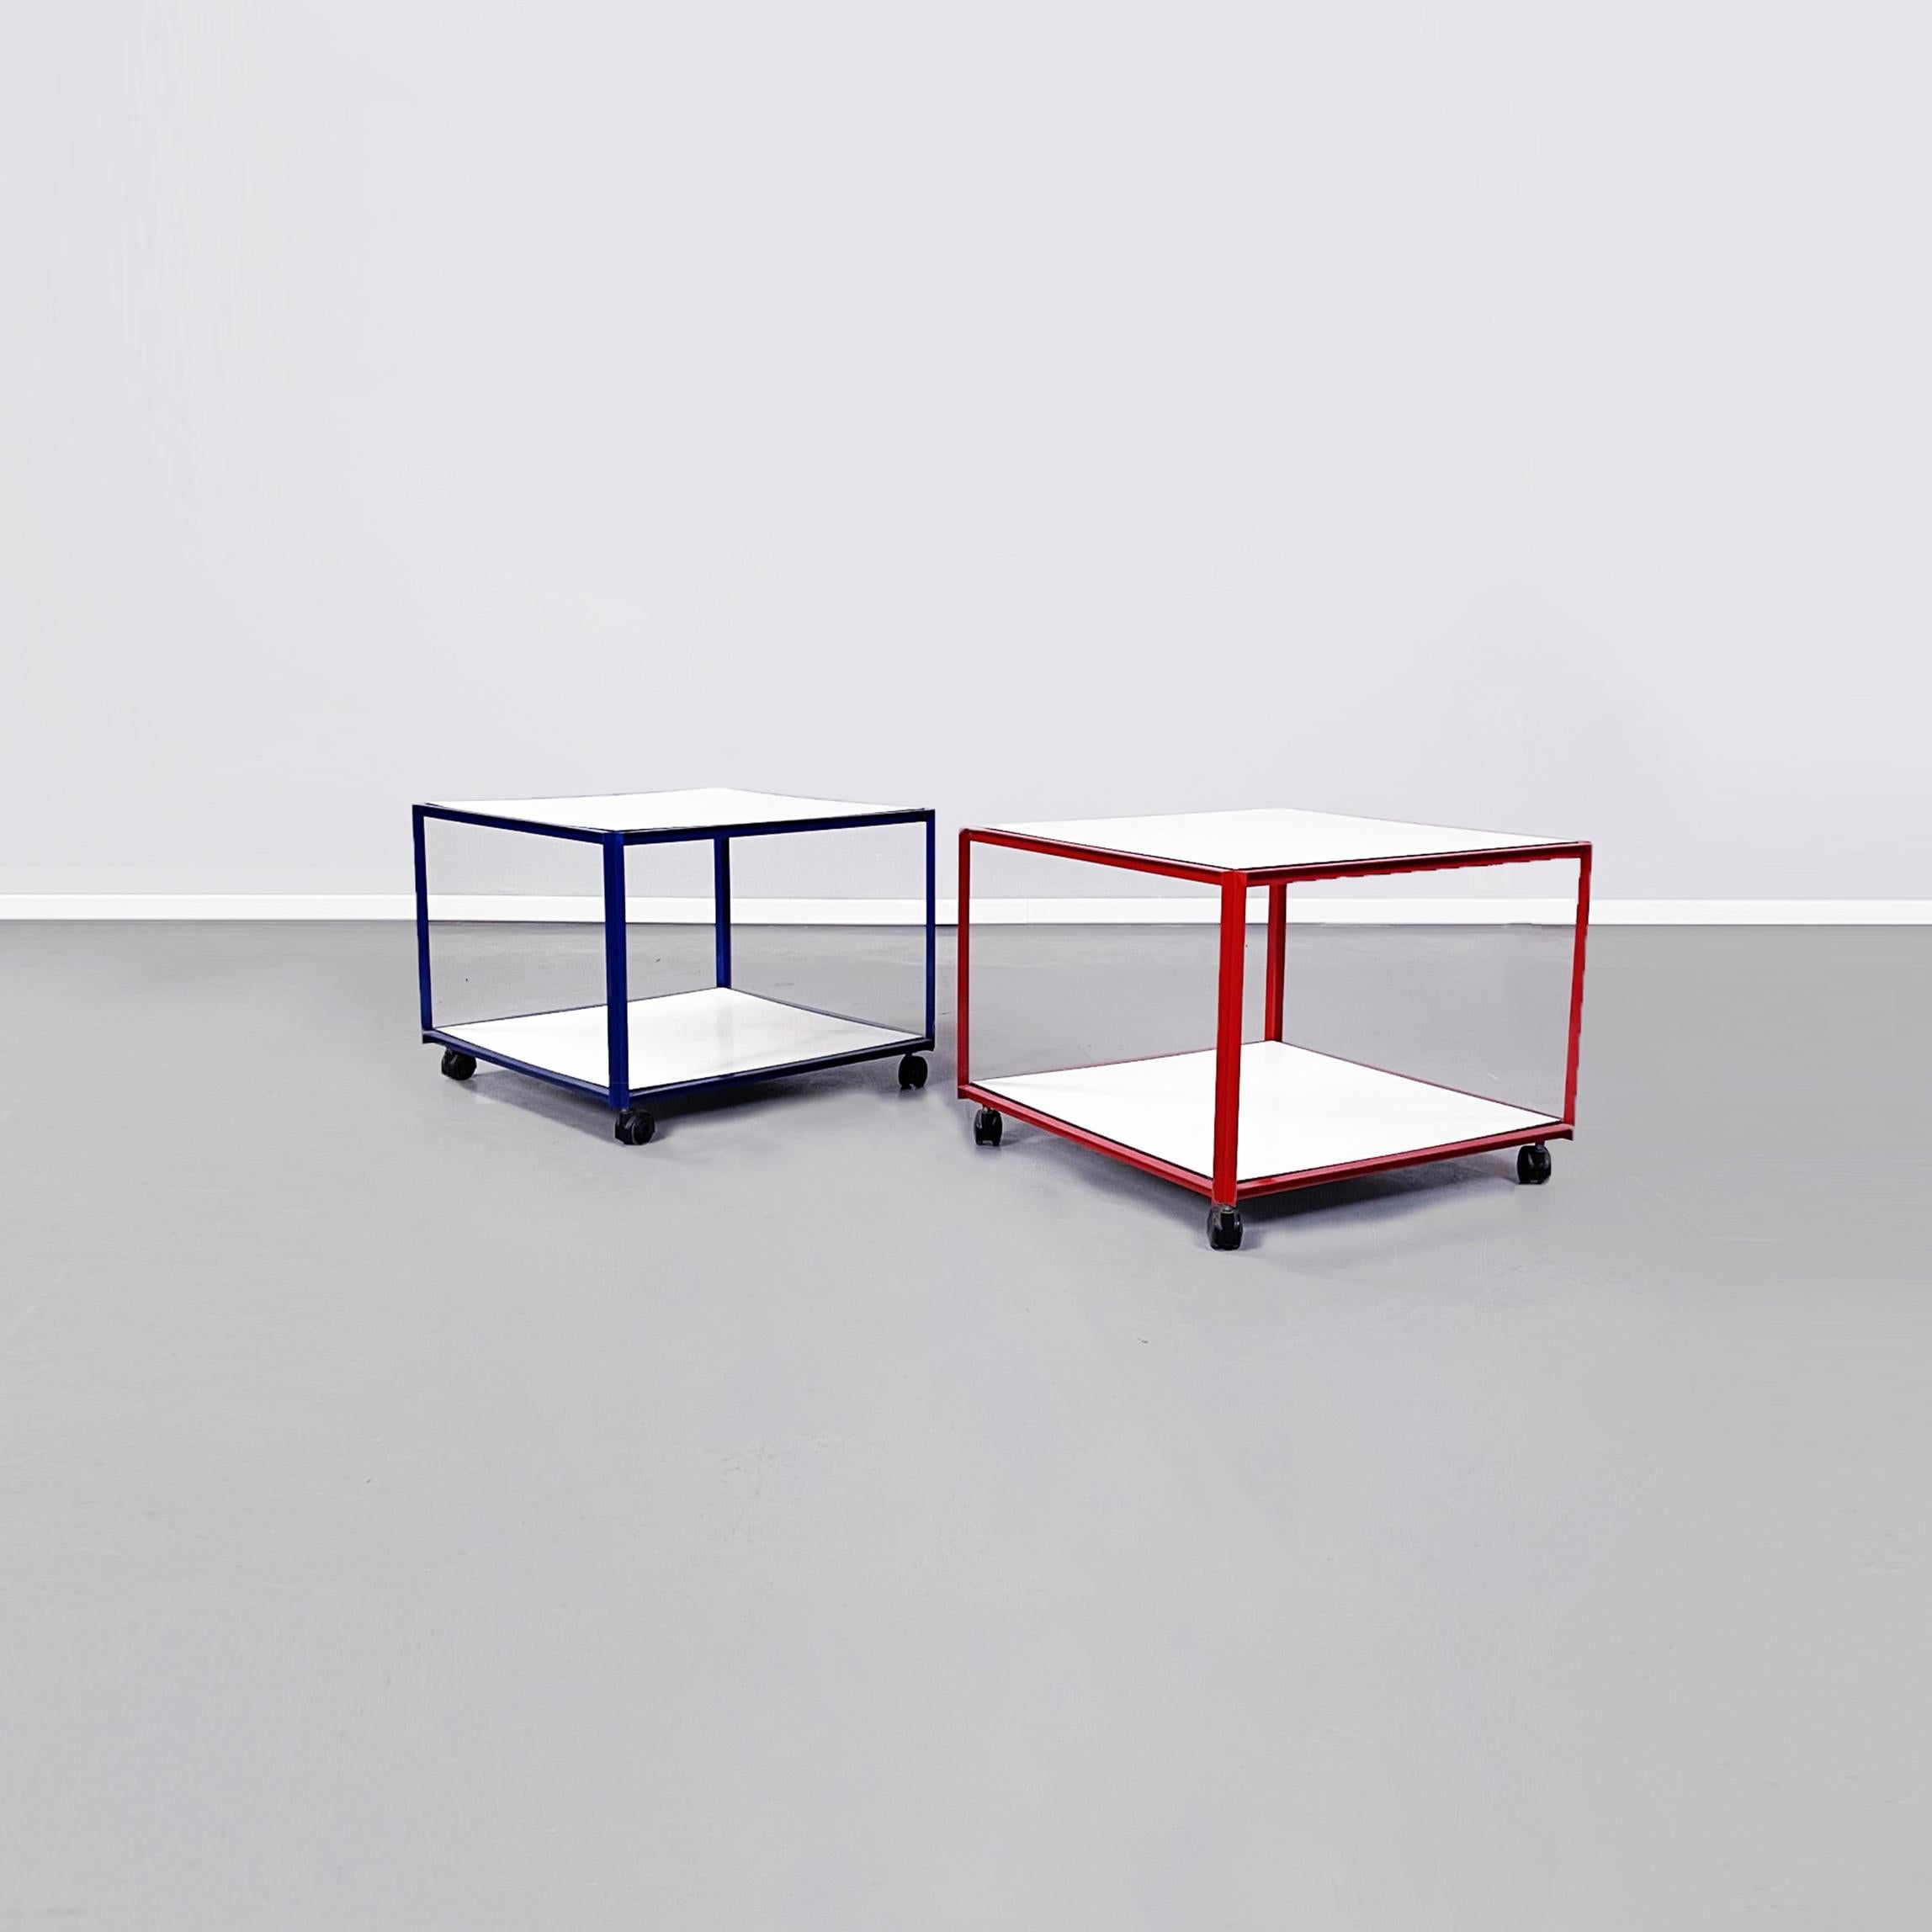 Italian Mid-Century Modern pair of ??coffee tables by Alias, 1980s.
Pair of coffee tables with two tops in white painted wood and metal structure painted in red and blue. Can be used as carts.

Produced by Alias ??Italia, with label present on